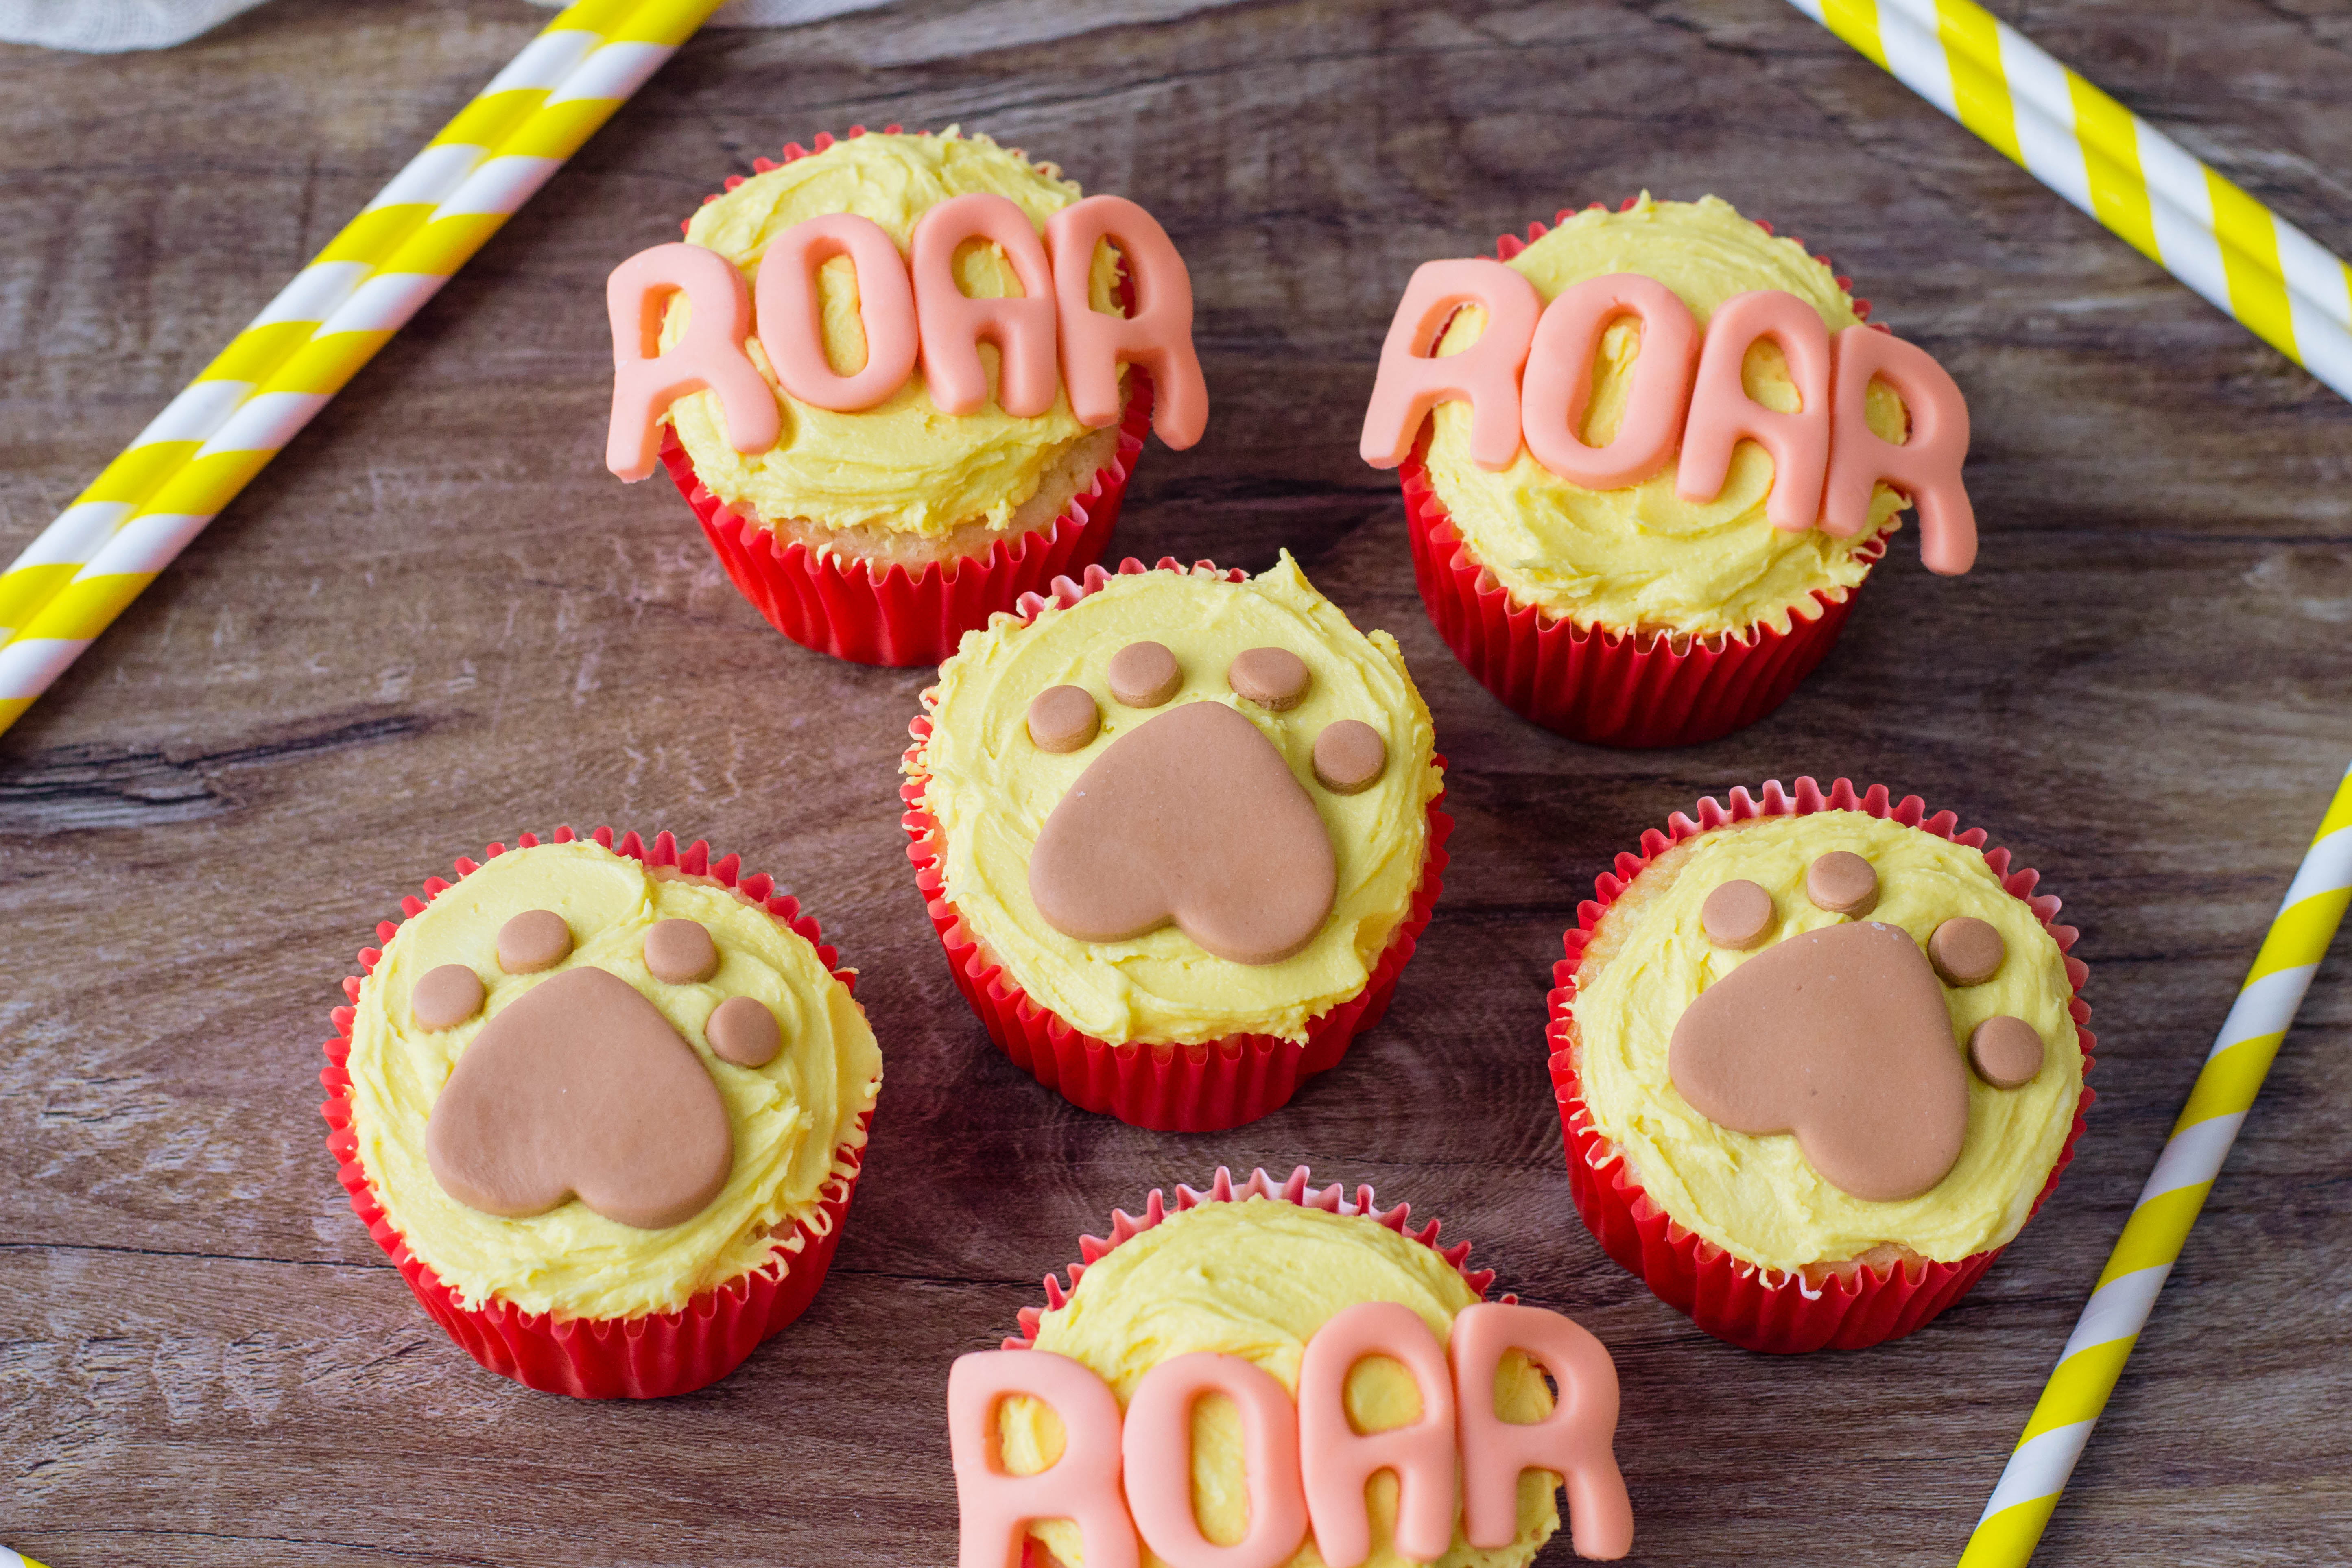 I'm Working On "My Roar" Lion King Inspired Cupcakes